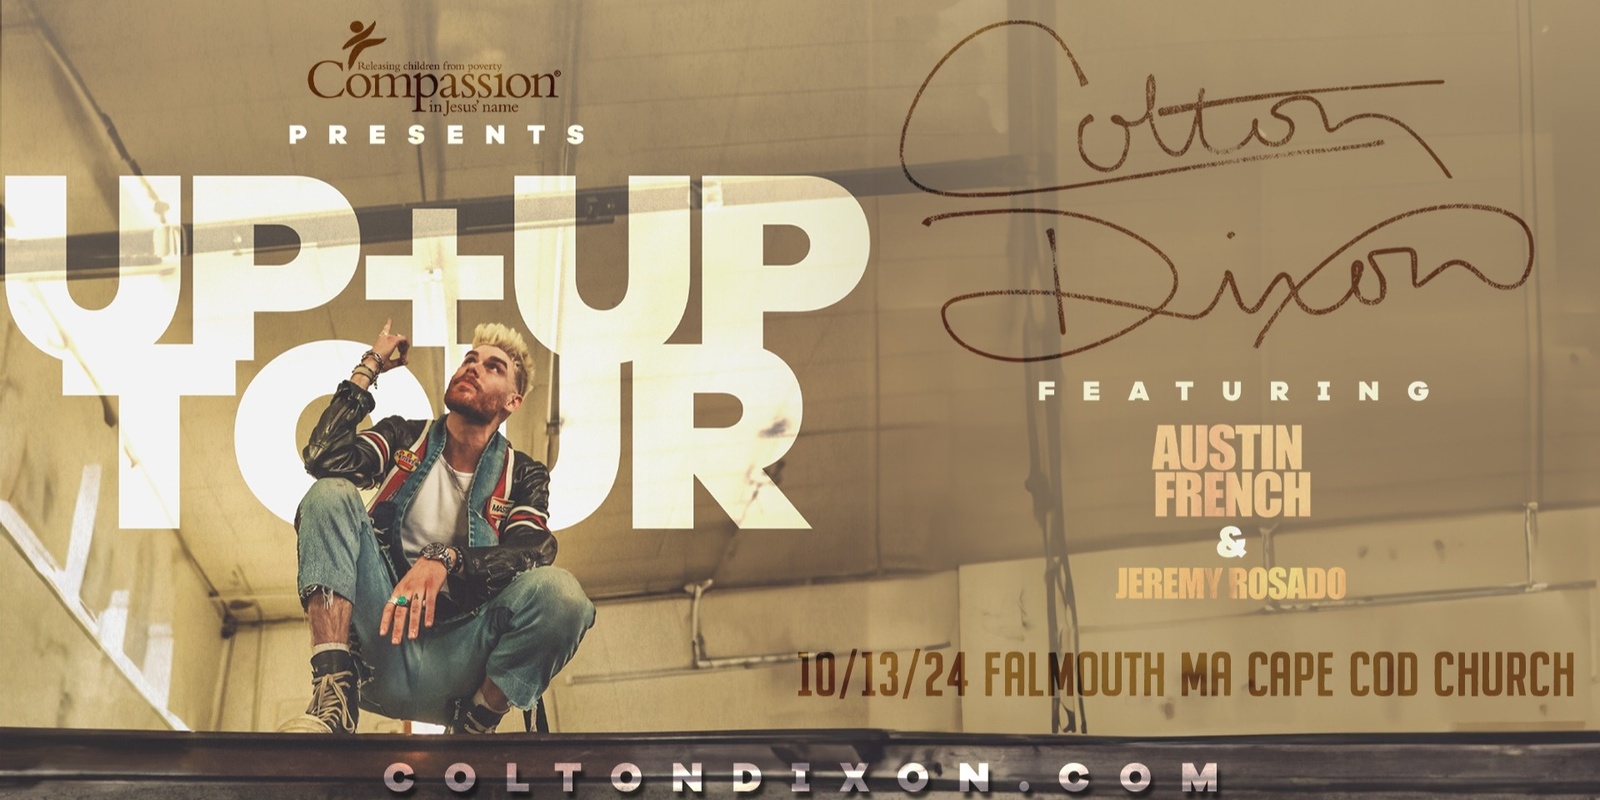 Banner image for Colton Dixon's Up & Up Tour featuring Austin French & Jeremy Rosado-Cape Cod Church